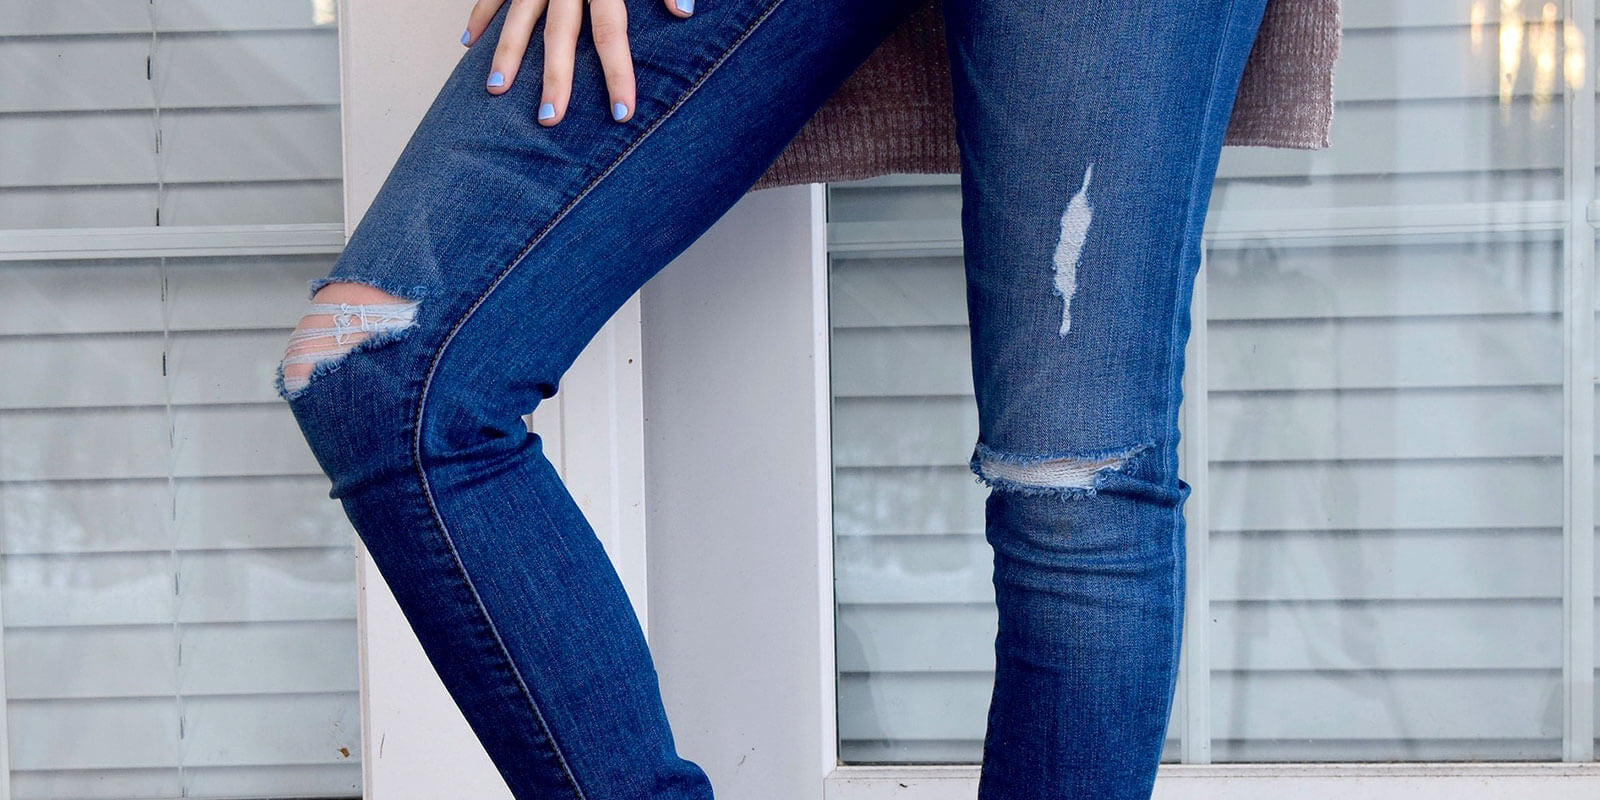 How many rips are one too many in your jeans?